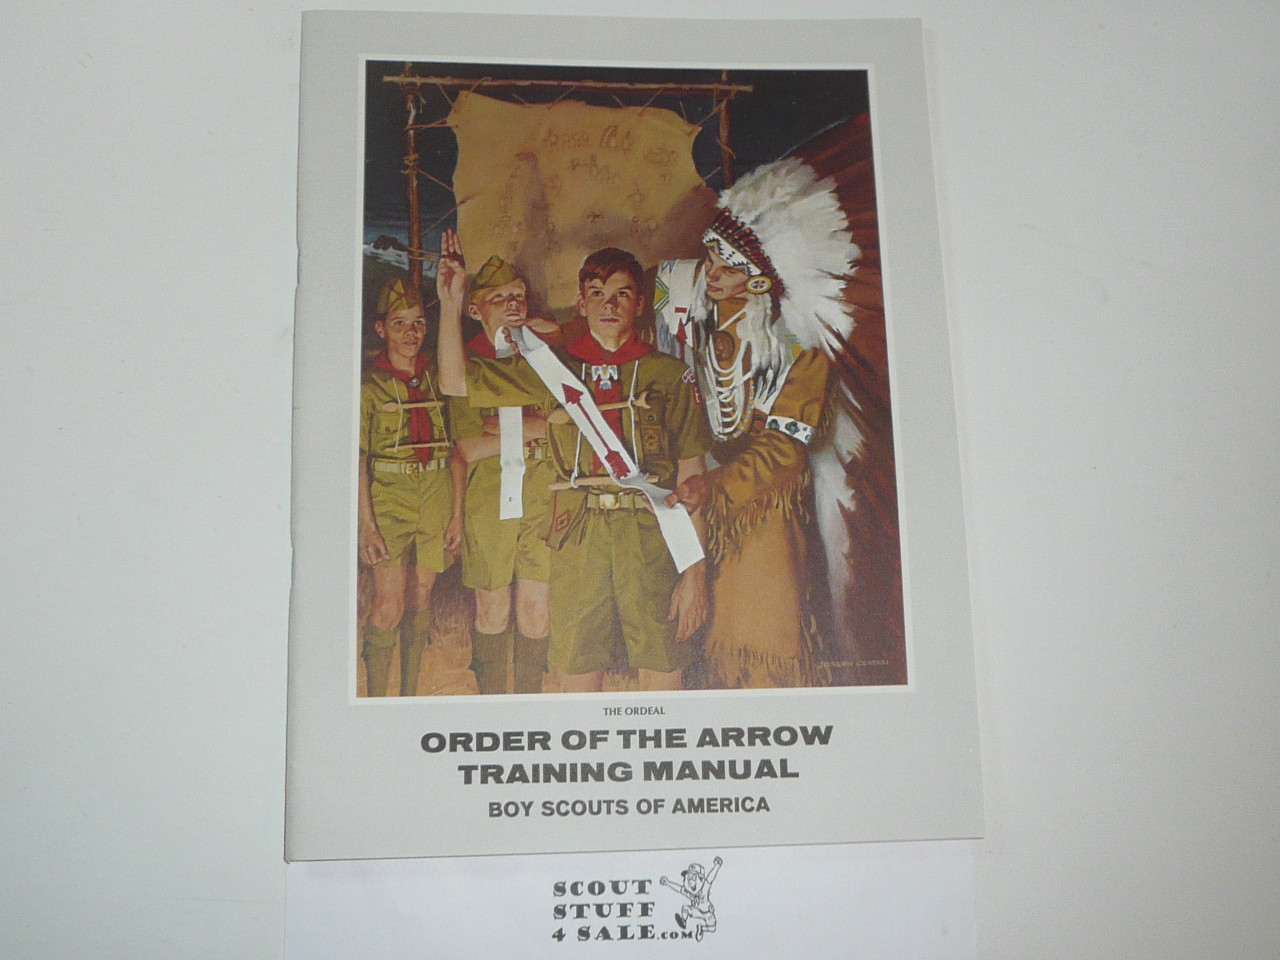 National Order of the Arrow Conference (NOAC), 1971 Training Manual